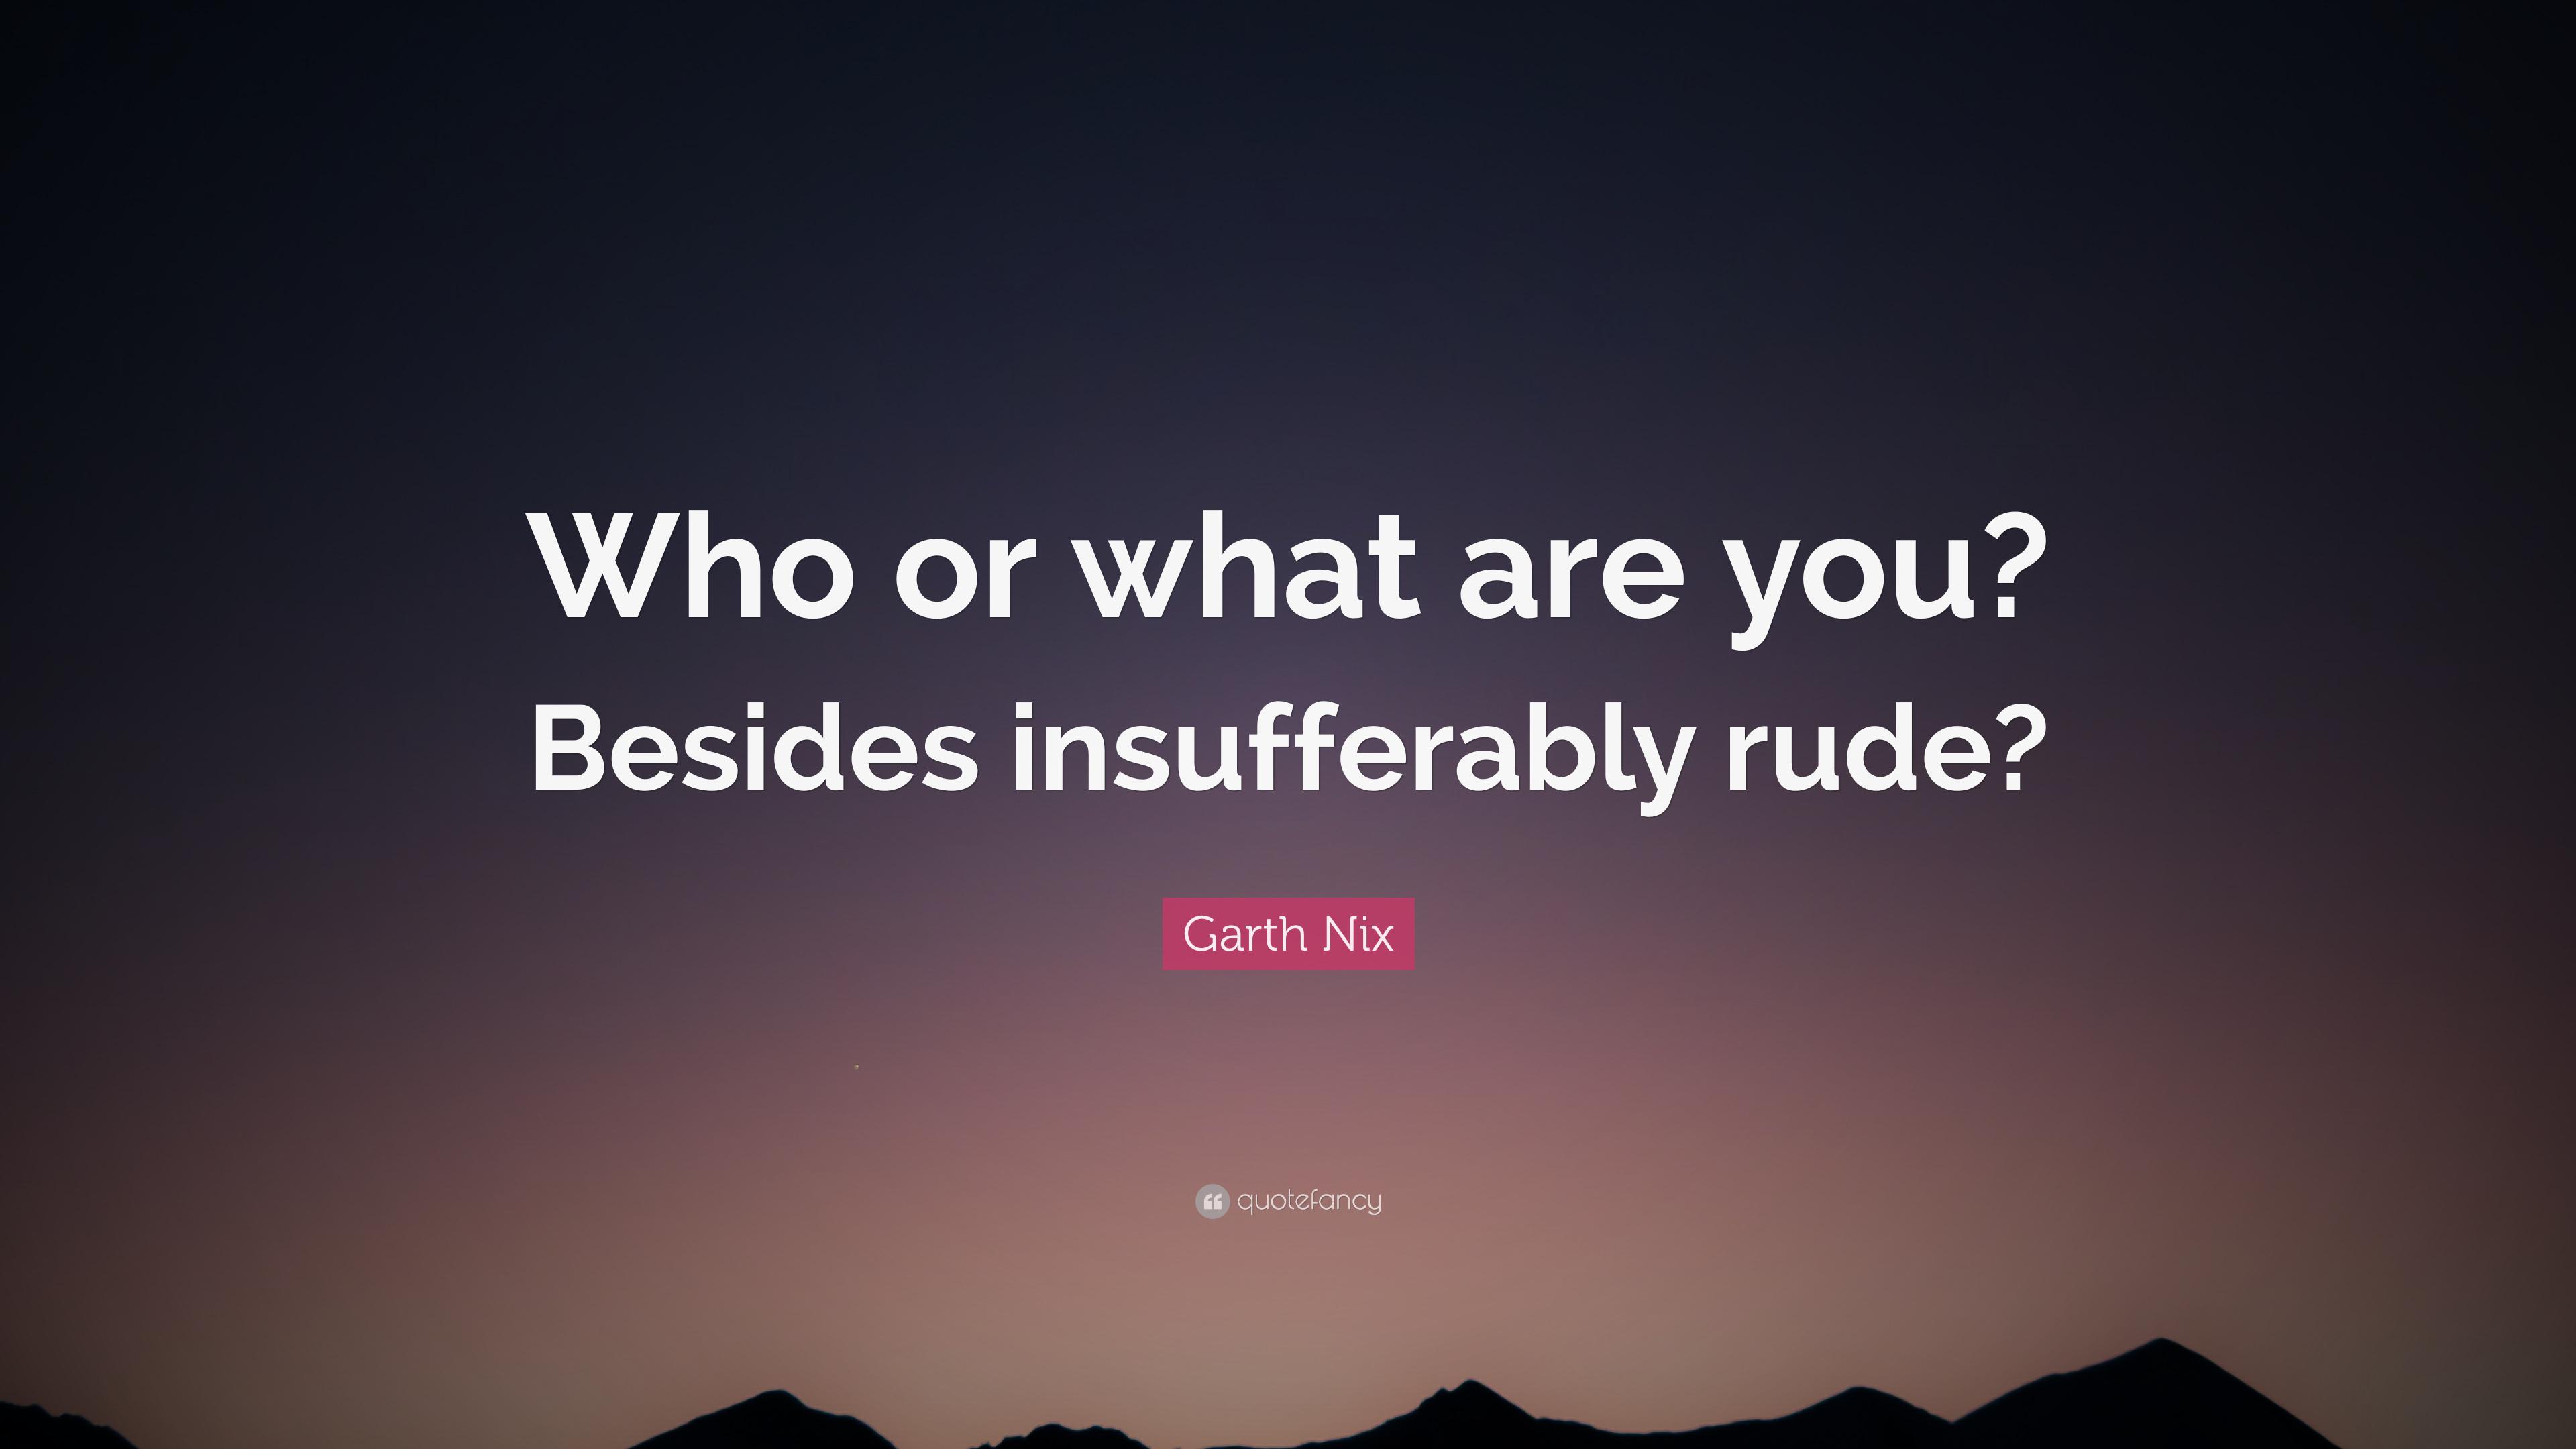 Garth Nix Quote: “Who or what are you? Besides insufferably